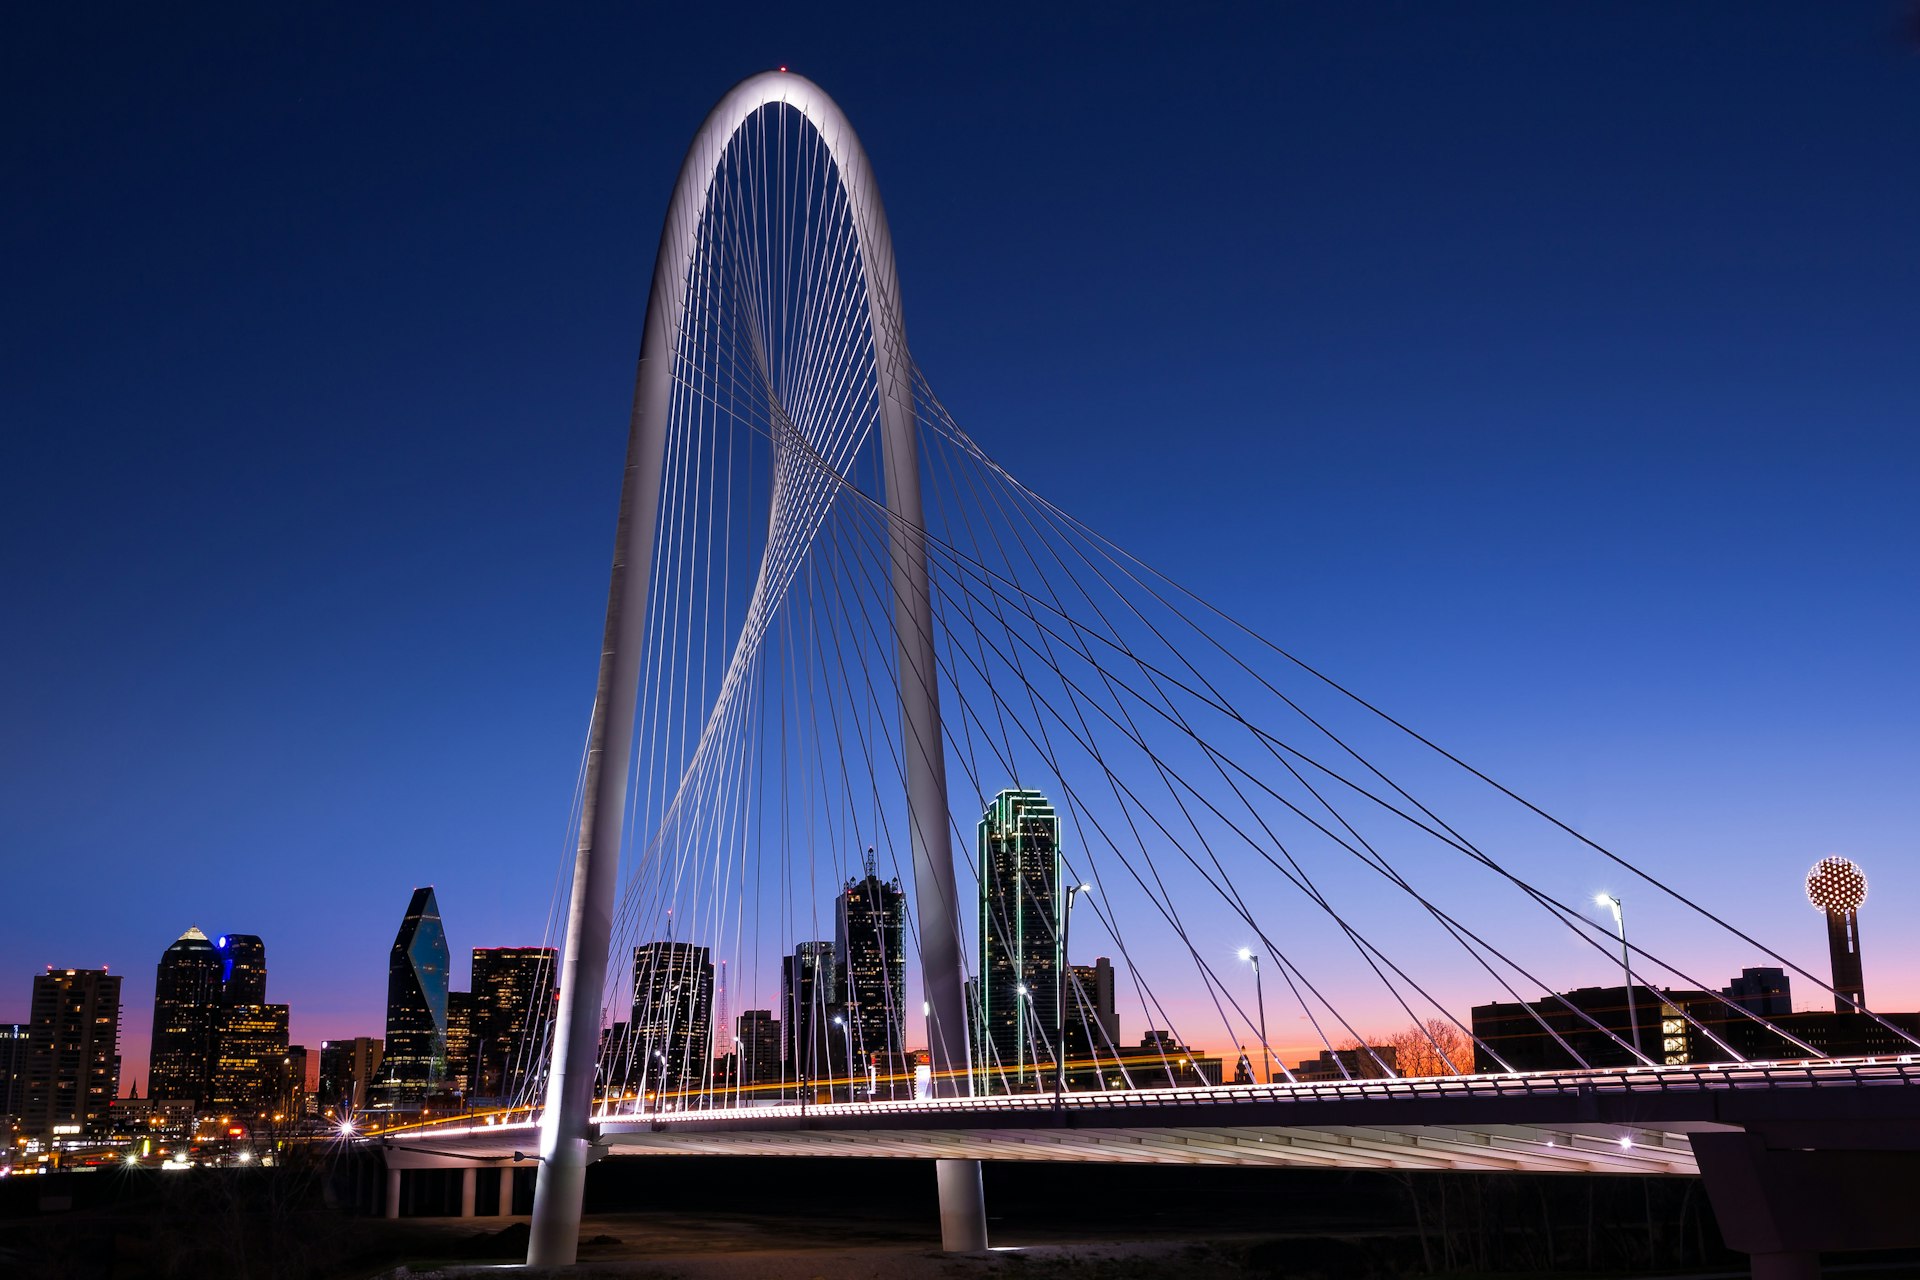 500px Photo ID: 96184399 - View of Margaret Hunt Hill Bridge at dawn with Dallas skyline in background.